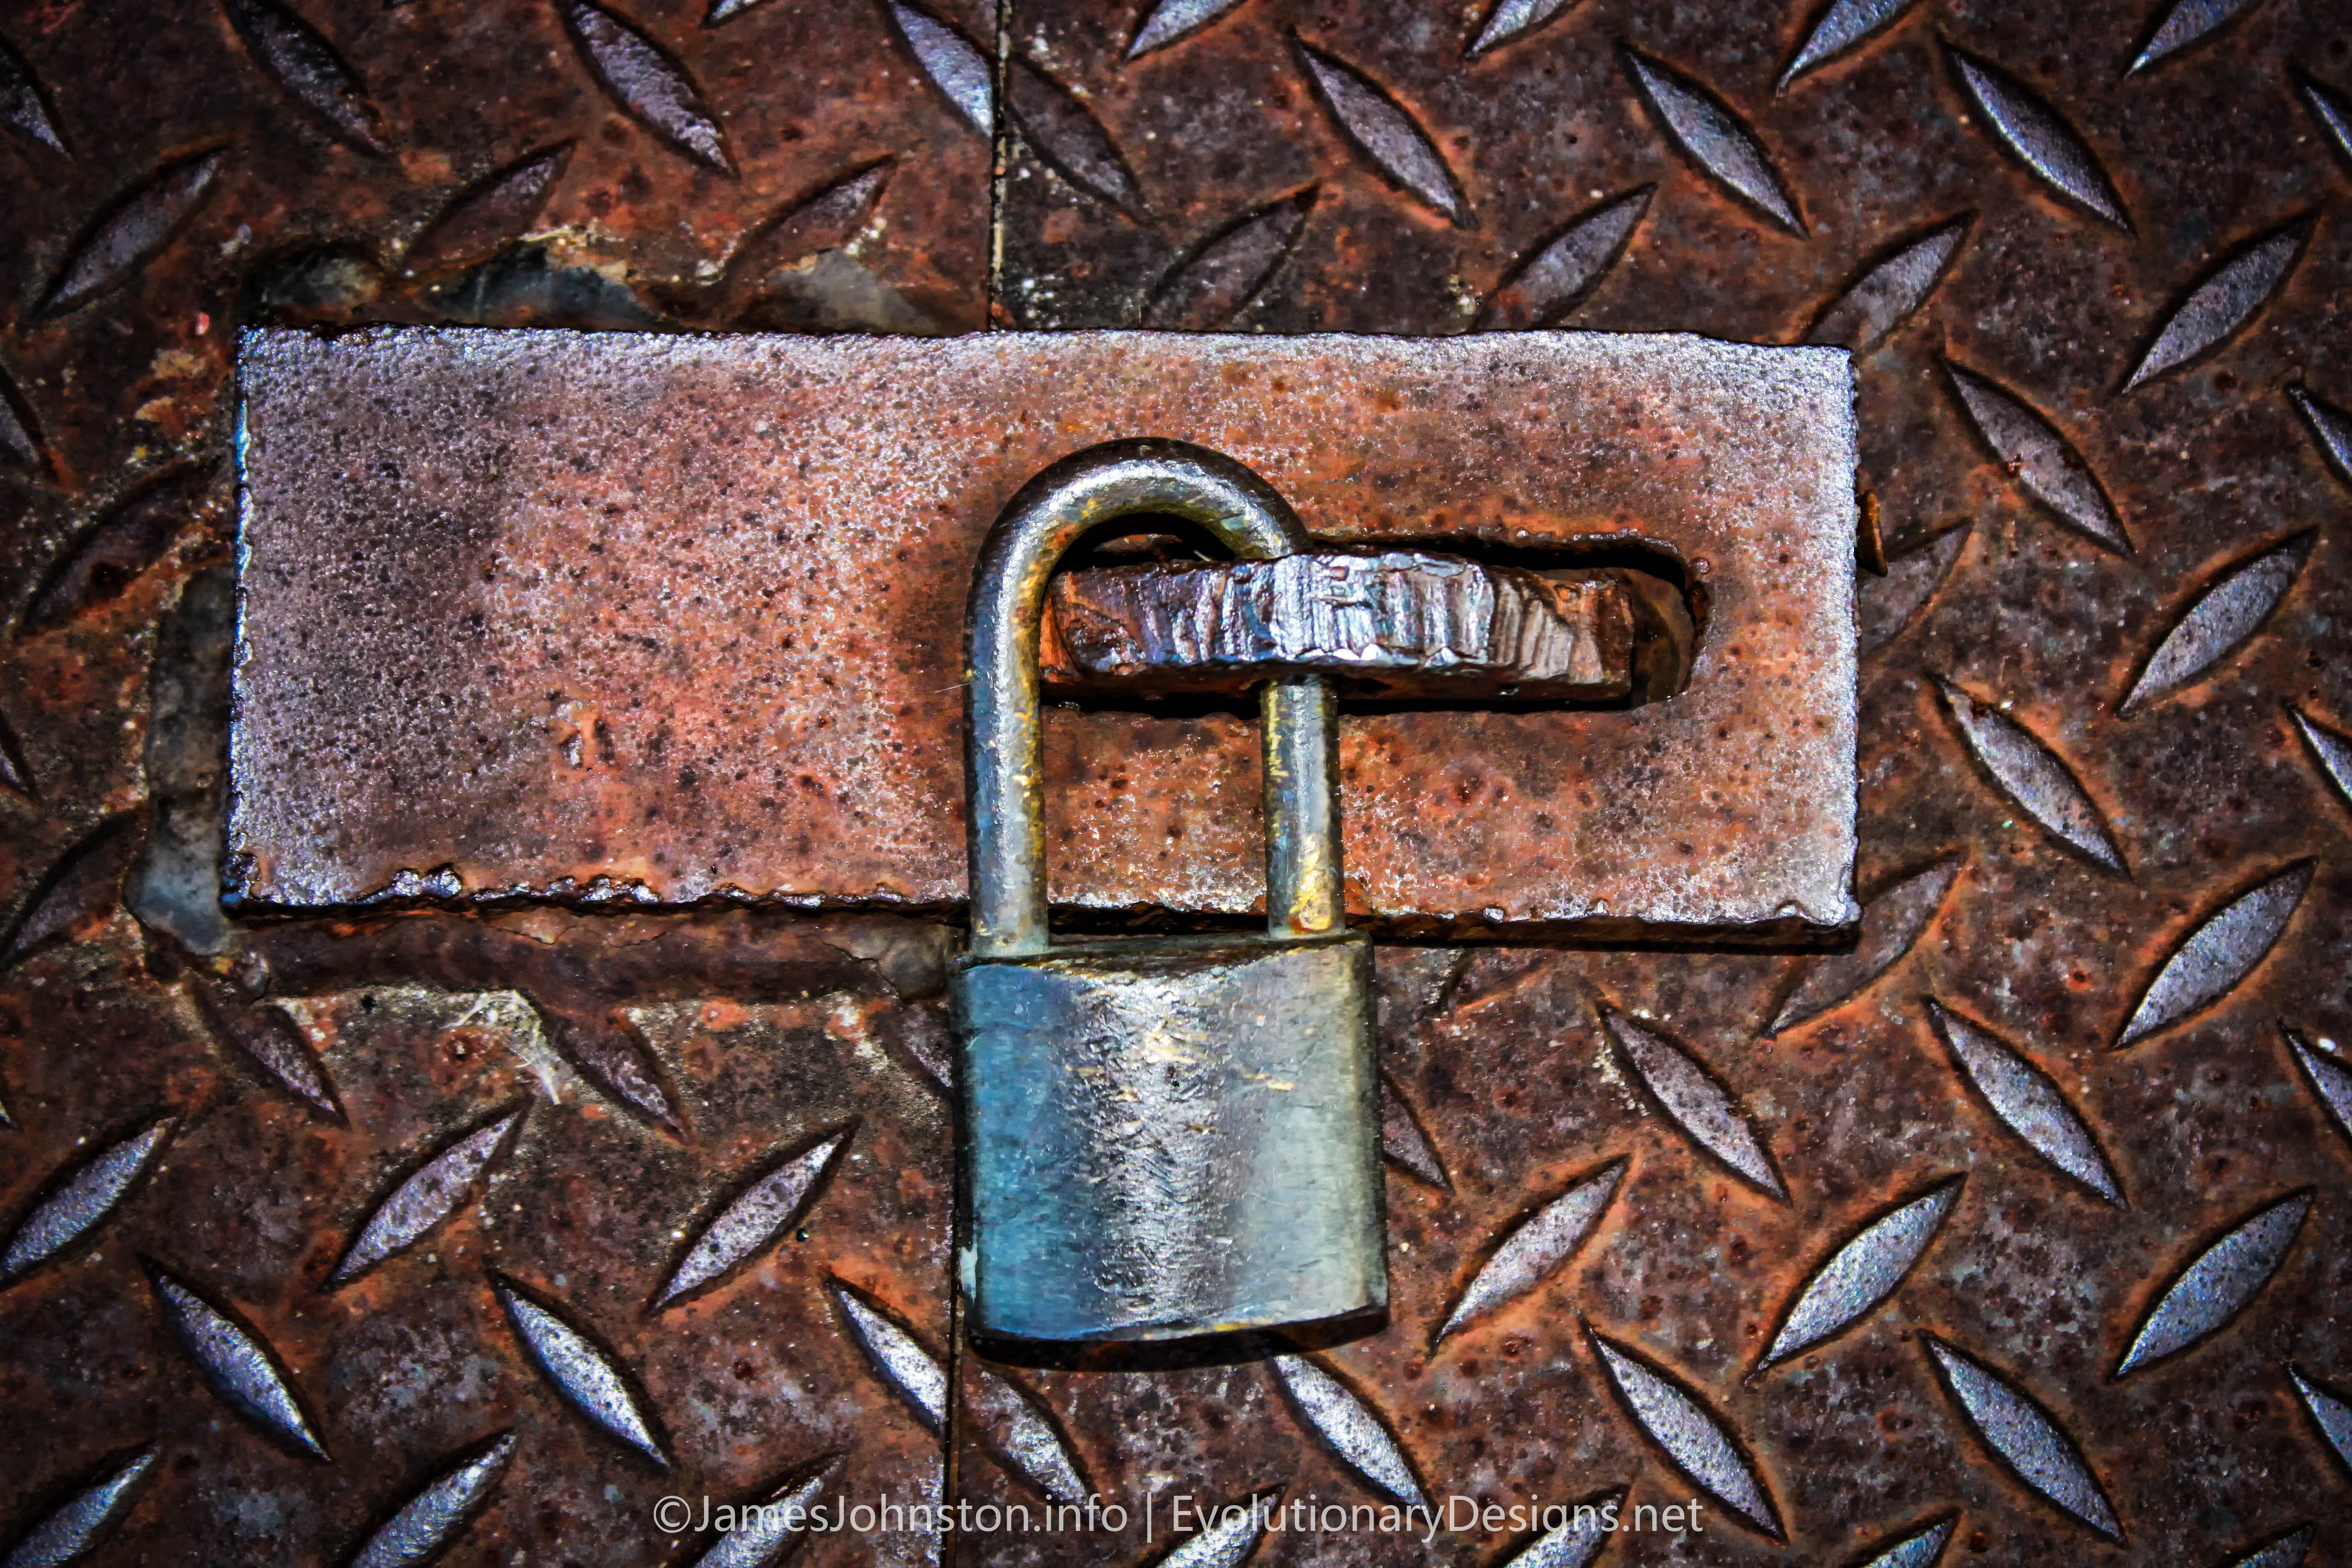 10 Images of New and Rusty Old Padlocks and Chains - James Johnston